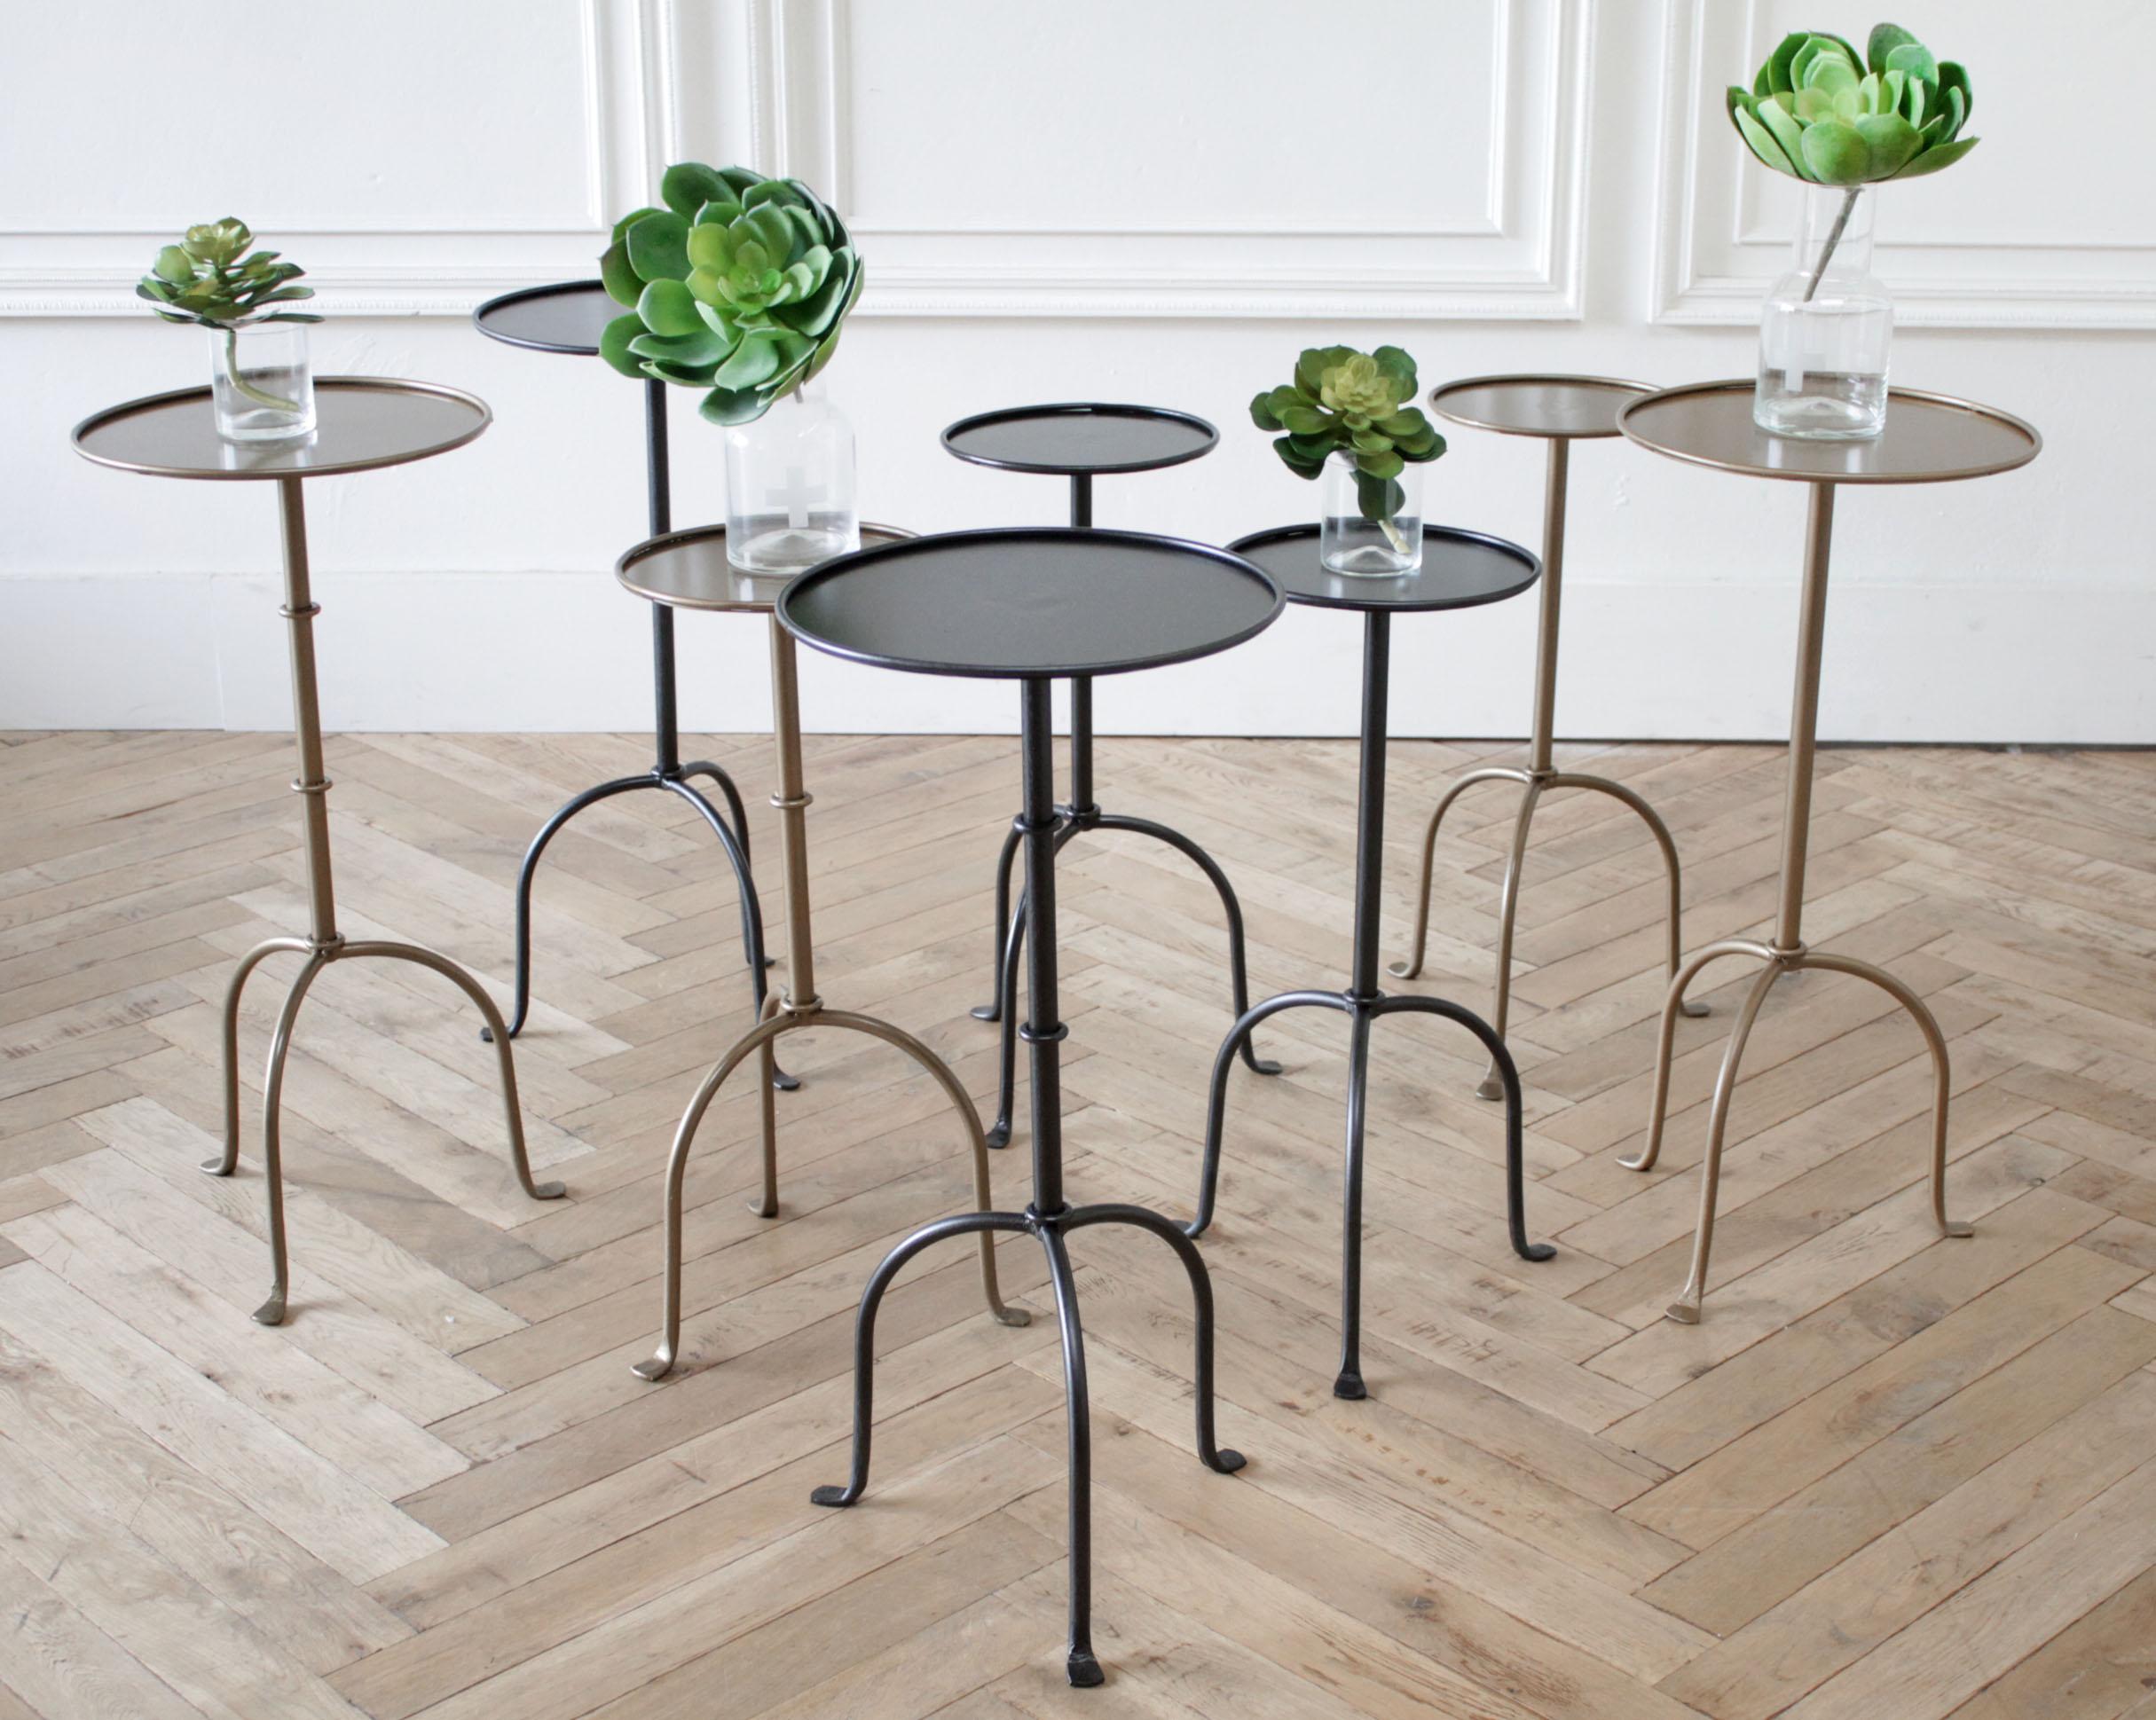 North American Cannes Tall Iron Drink Table in Iron Finish